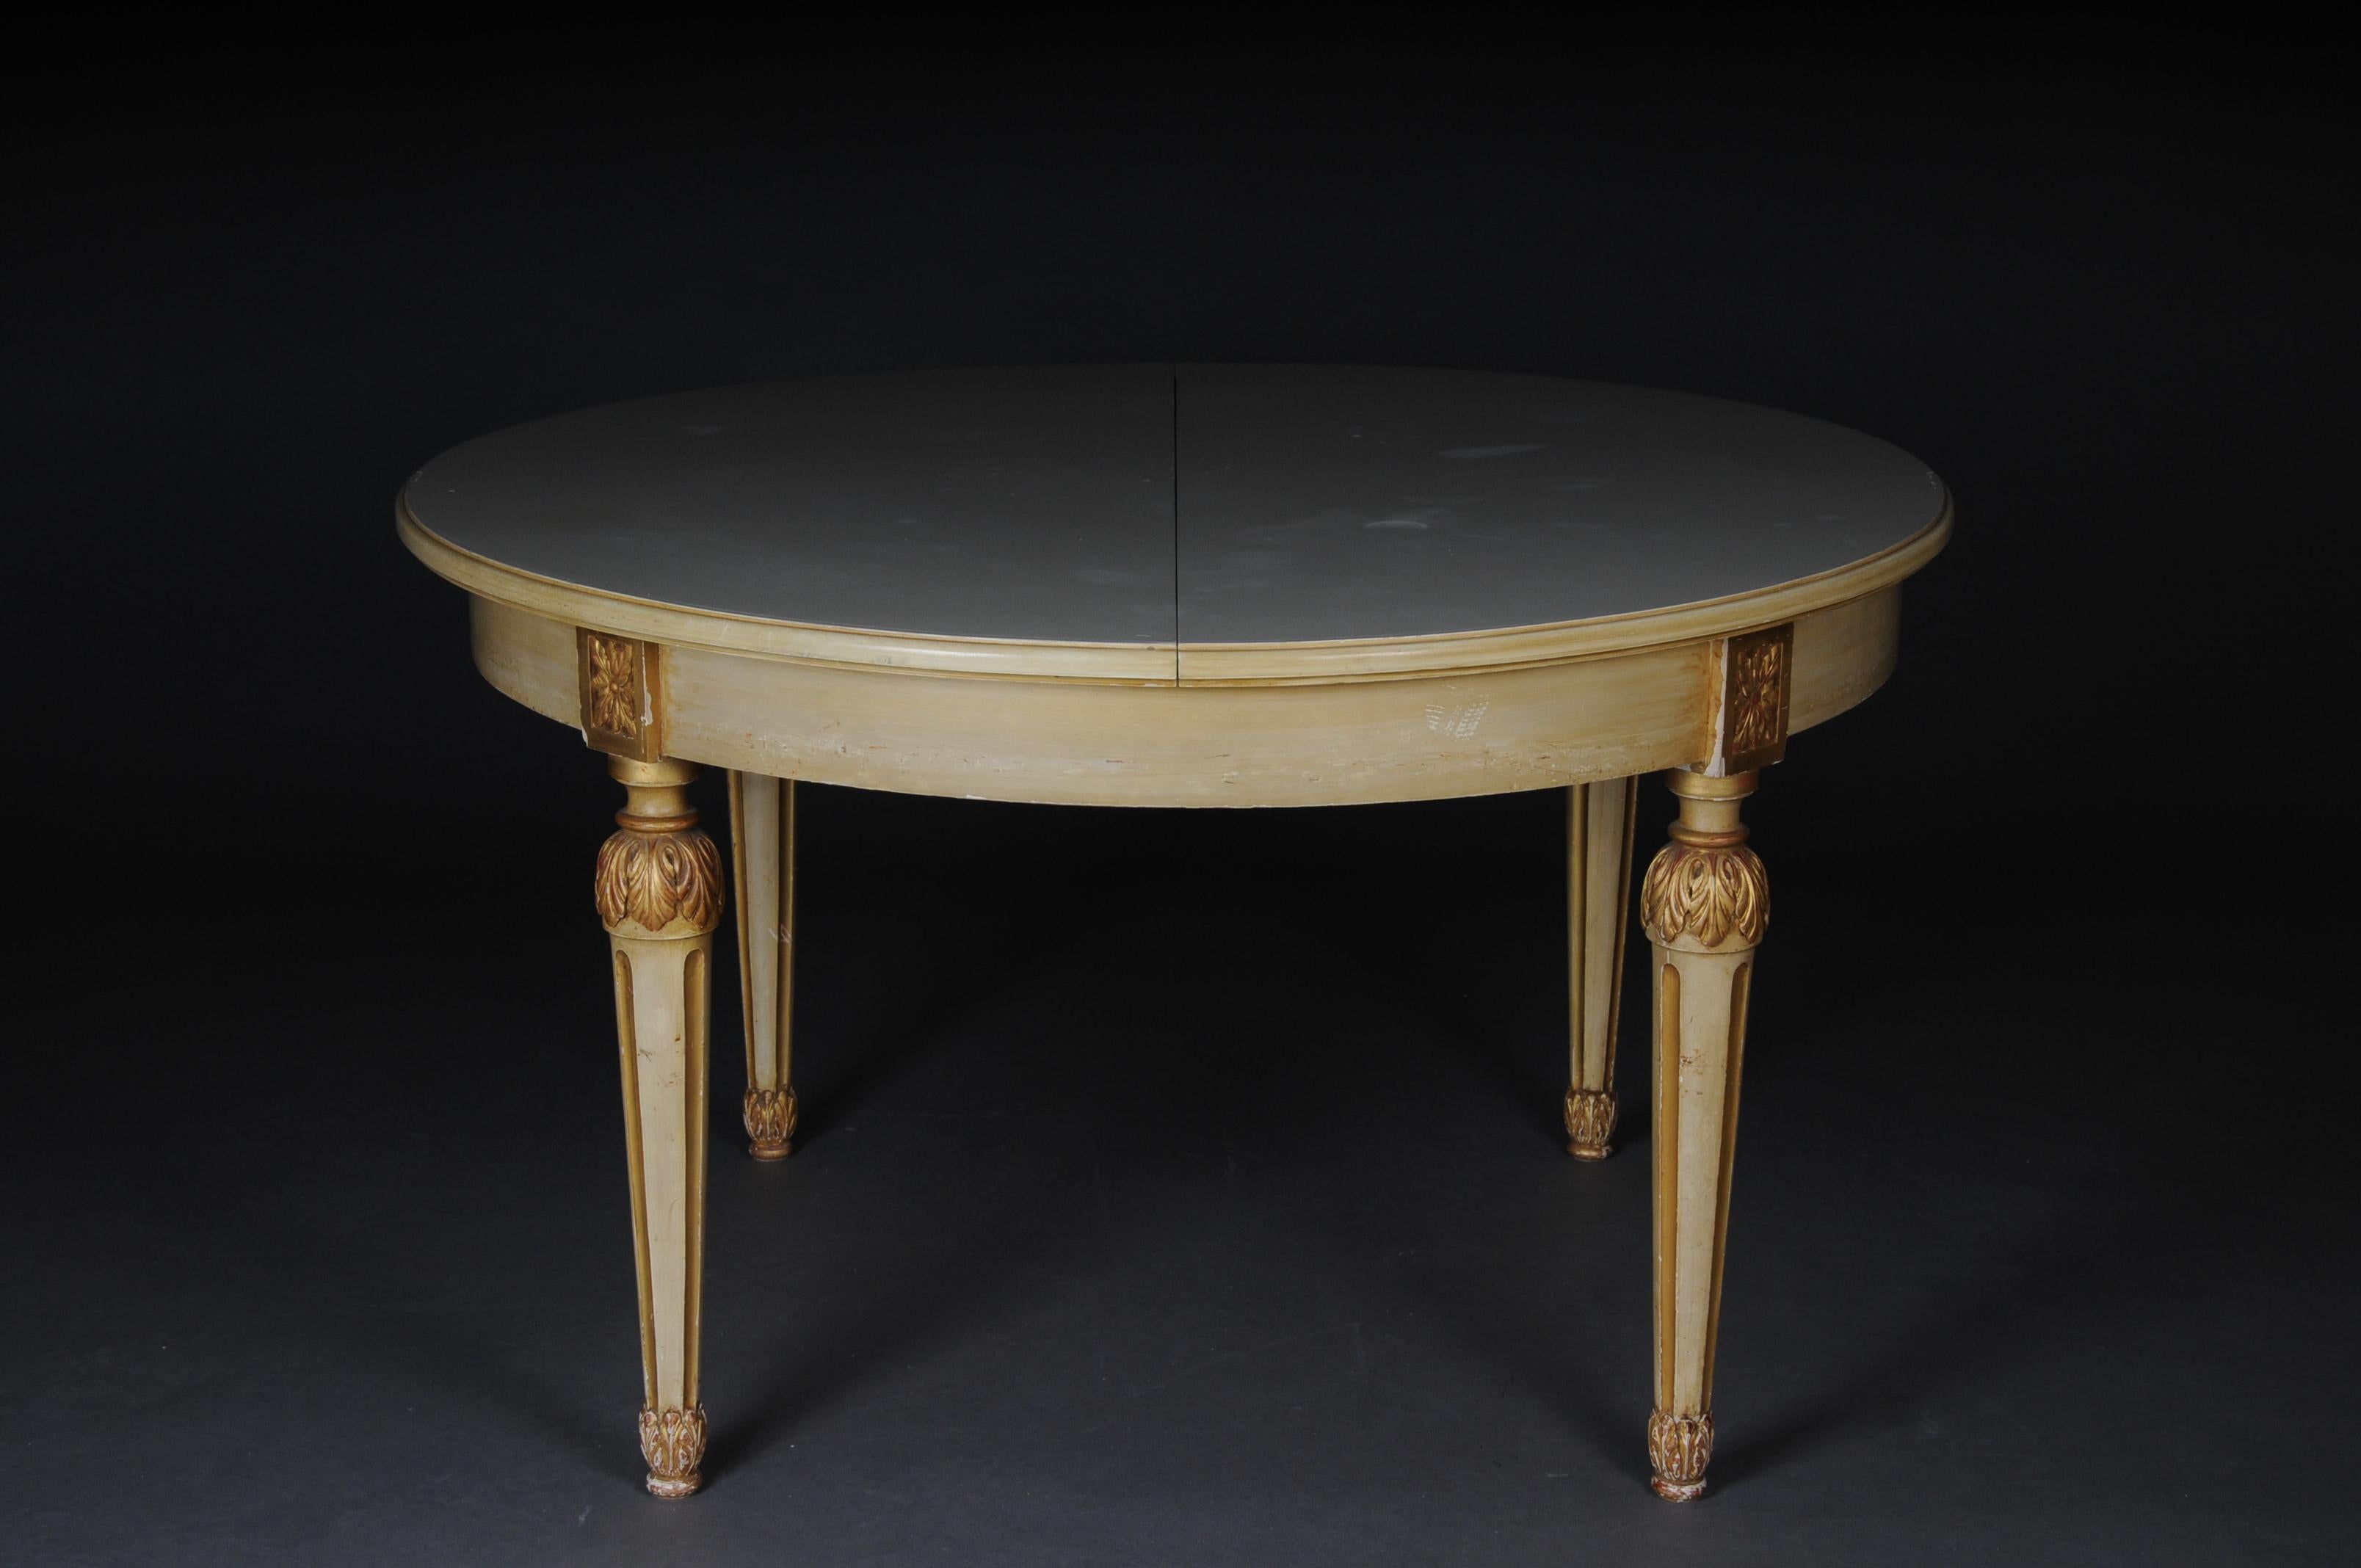 Round lounge dining table Louis XVI, circa 1930.

Solid wood, cream-framed and partially gold-plated table in Louis XVI style. Round plate on tall, conical, fluted pointed legs.
Extendable table with integrated tops.

Please take the condition